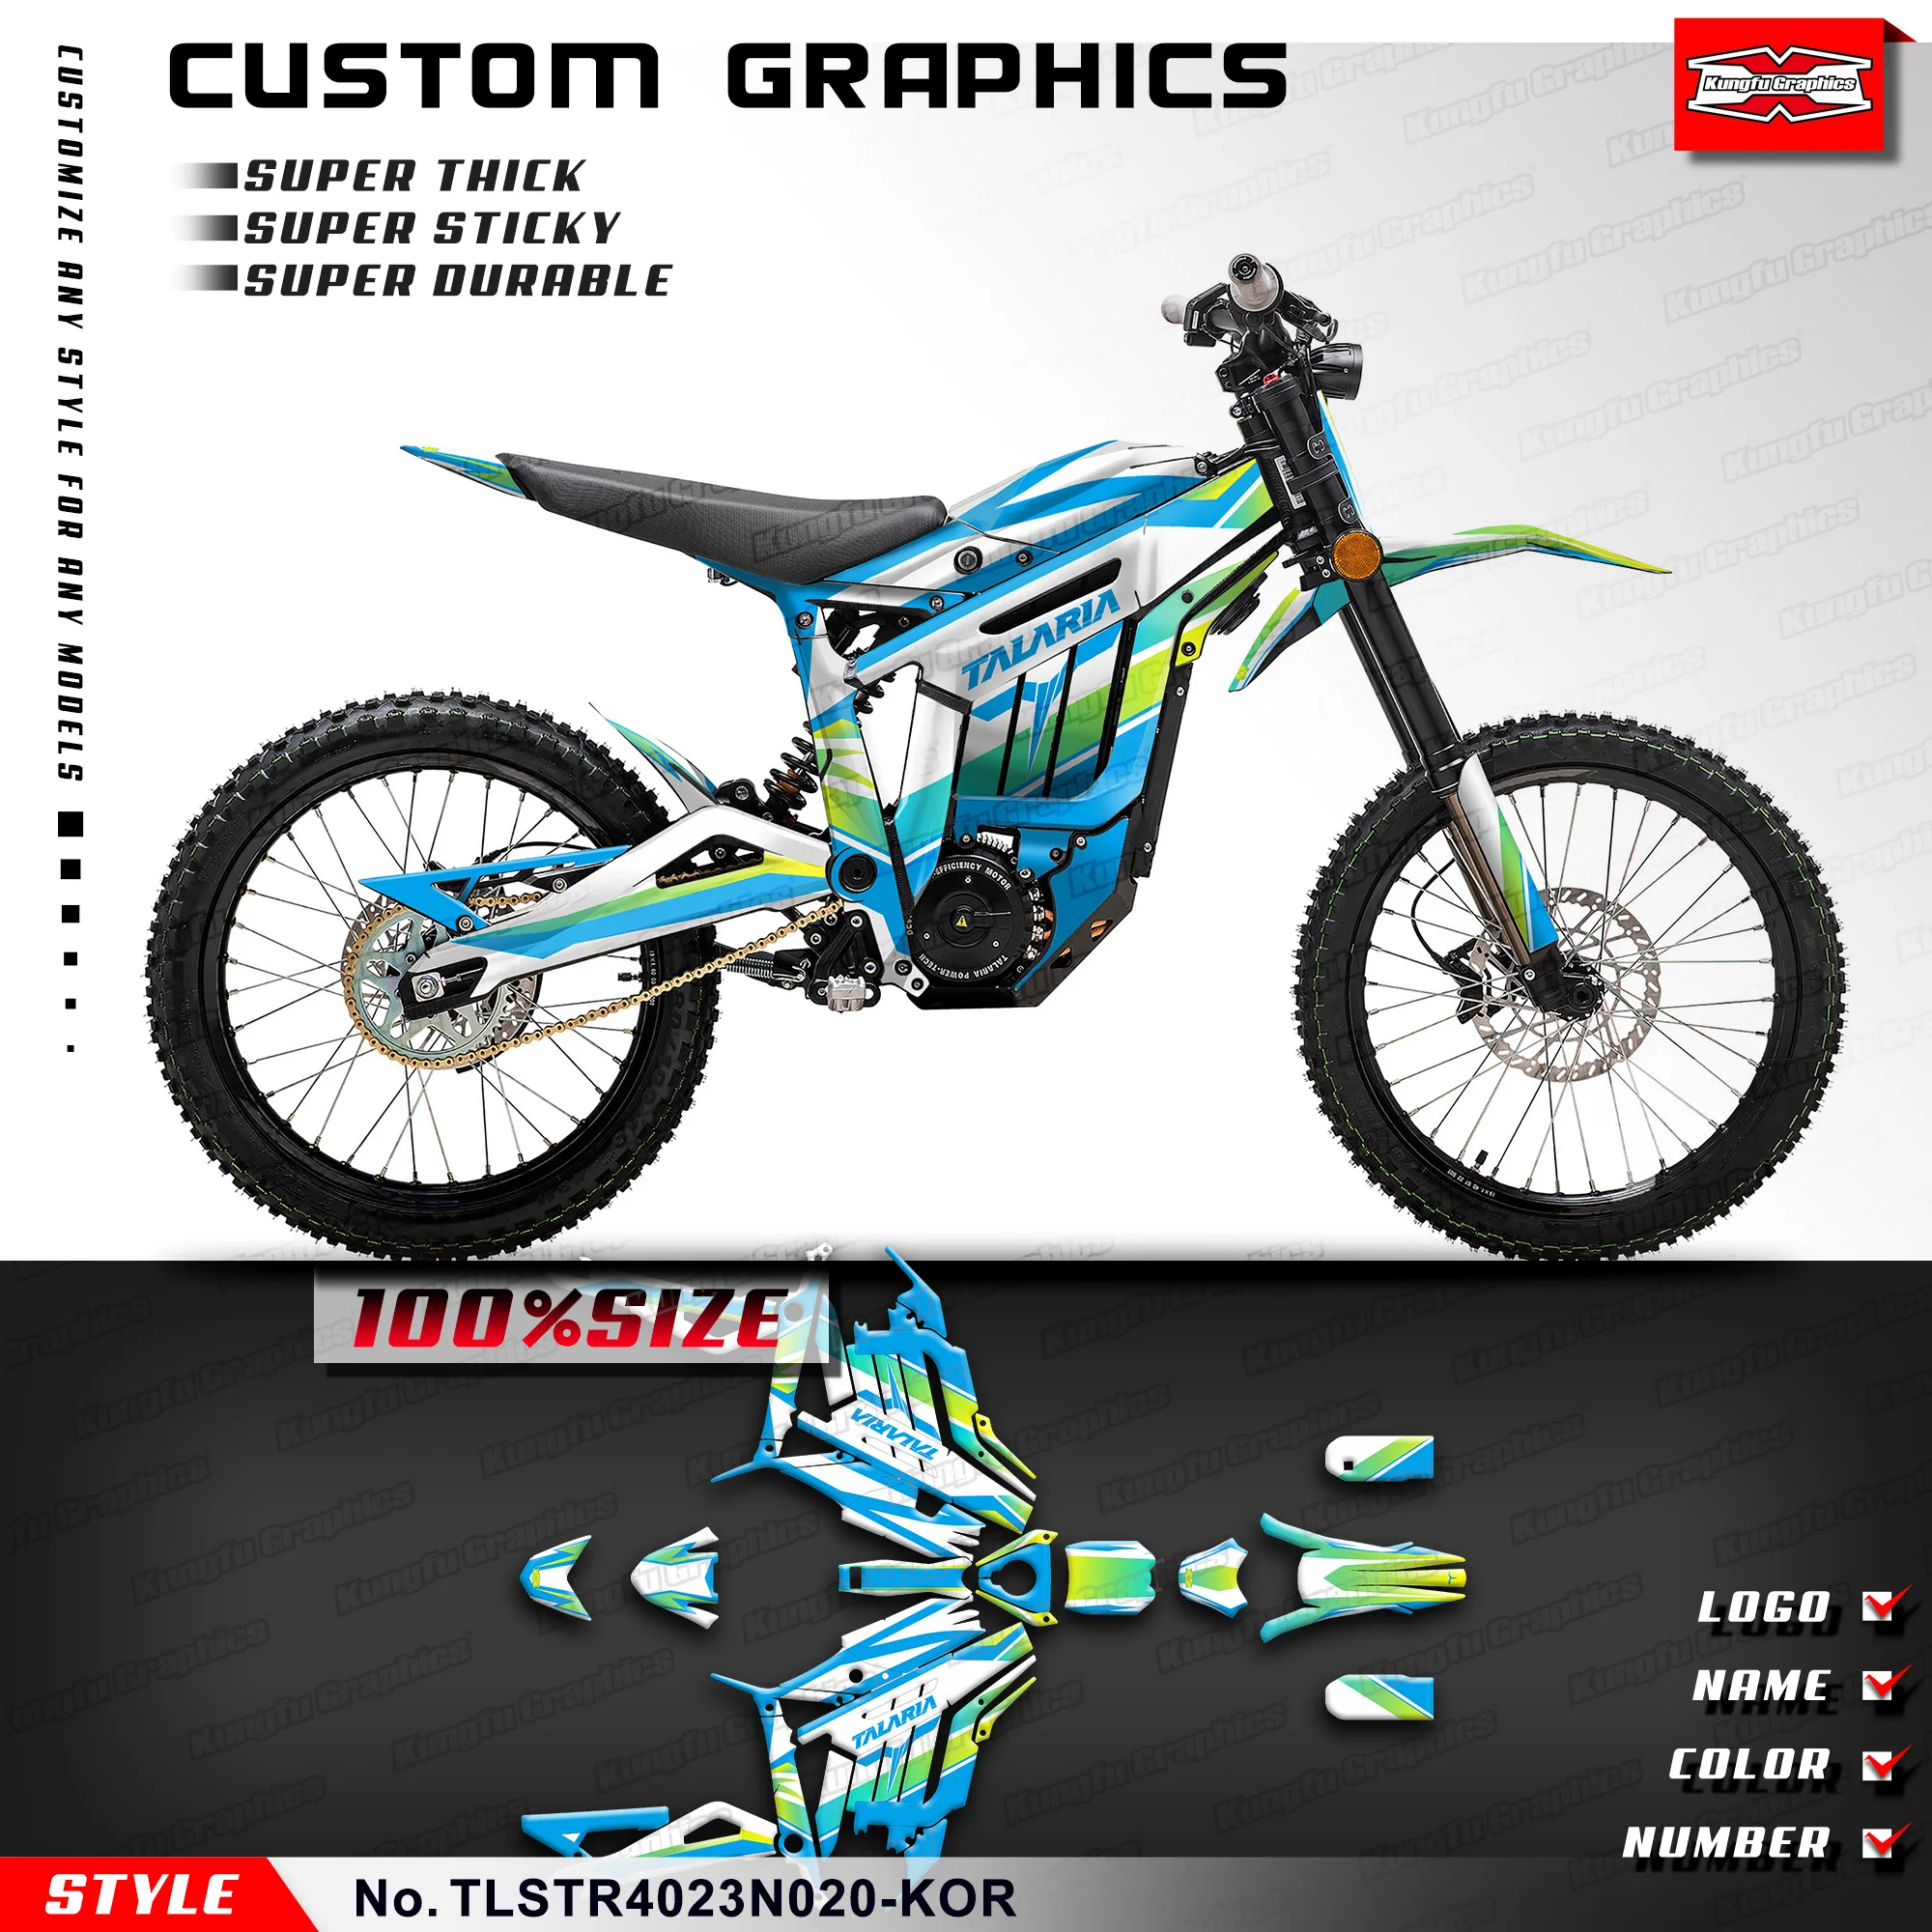 KUNGFU GRAPHICS Restyle Stickers Motocross Decal Kit for TALARIA Sting R MX L1E SX3 Dirt eBike sting ten summoner s tales 1 cd